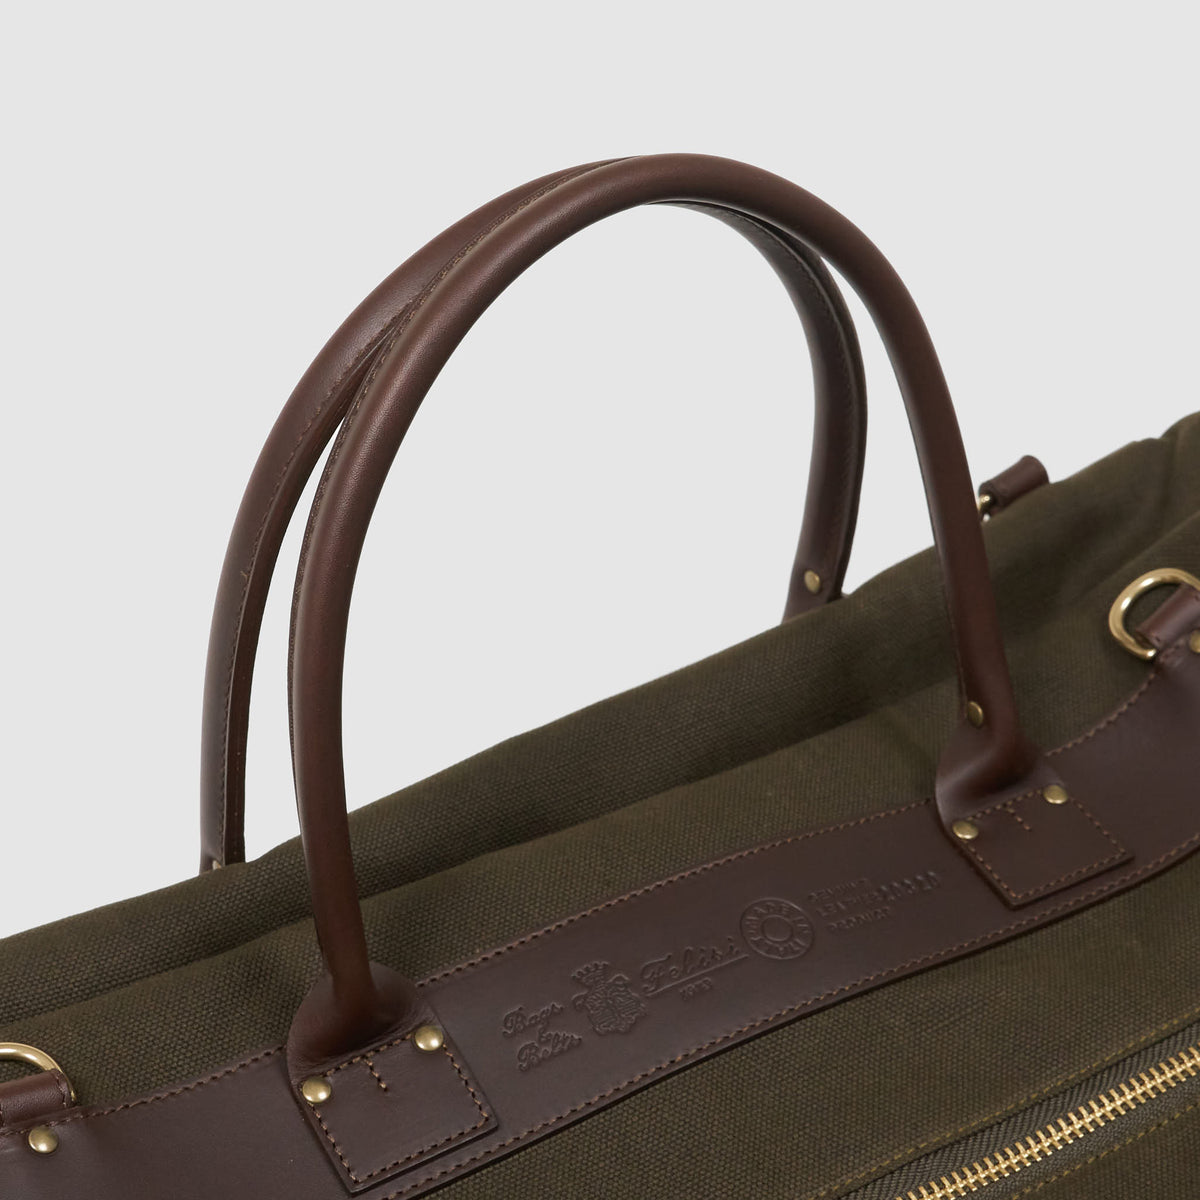 Felisi Exclusive Canvas Double Carrying Suitcase Bag